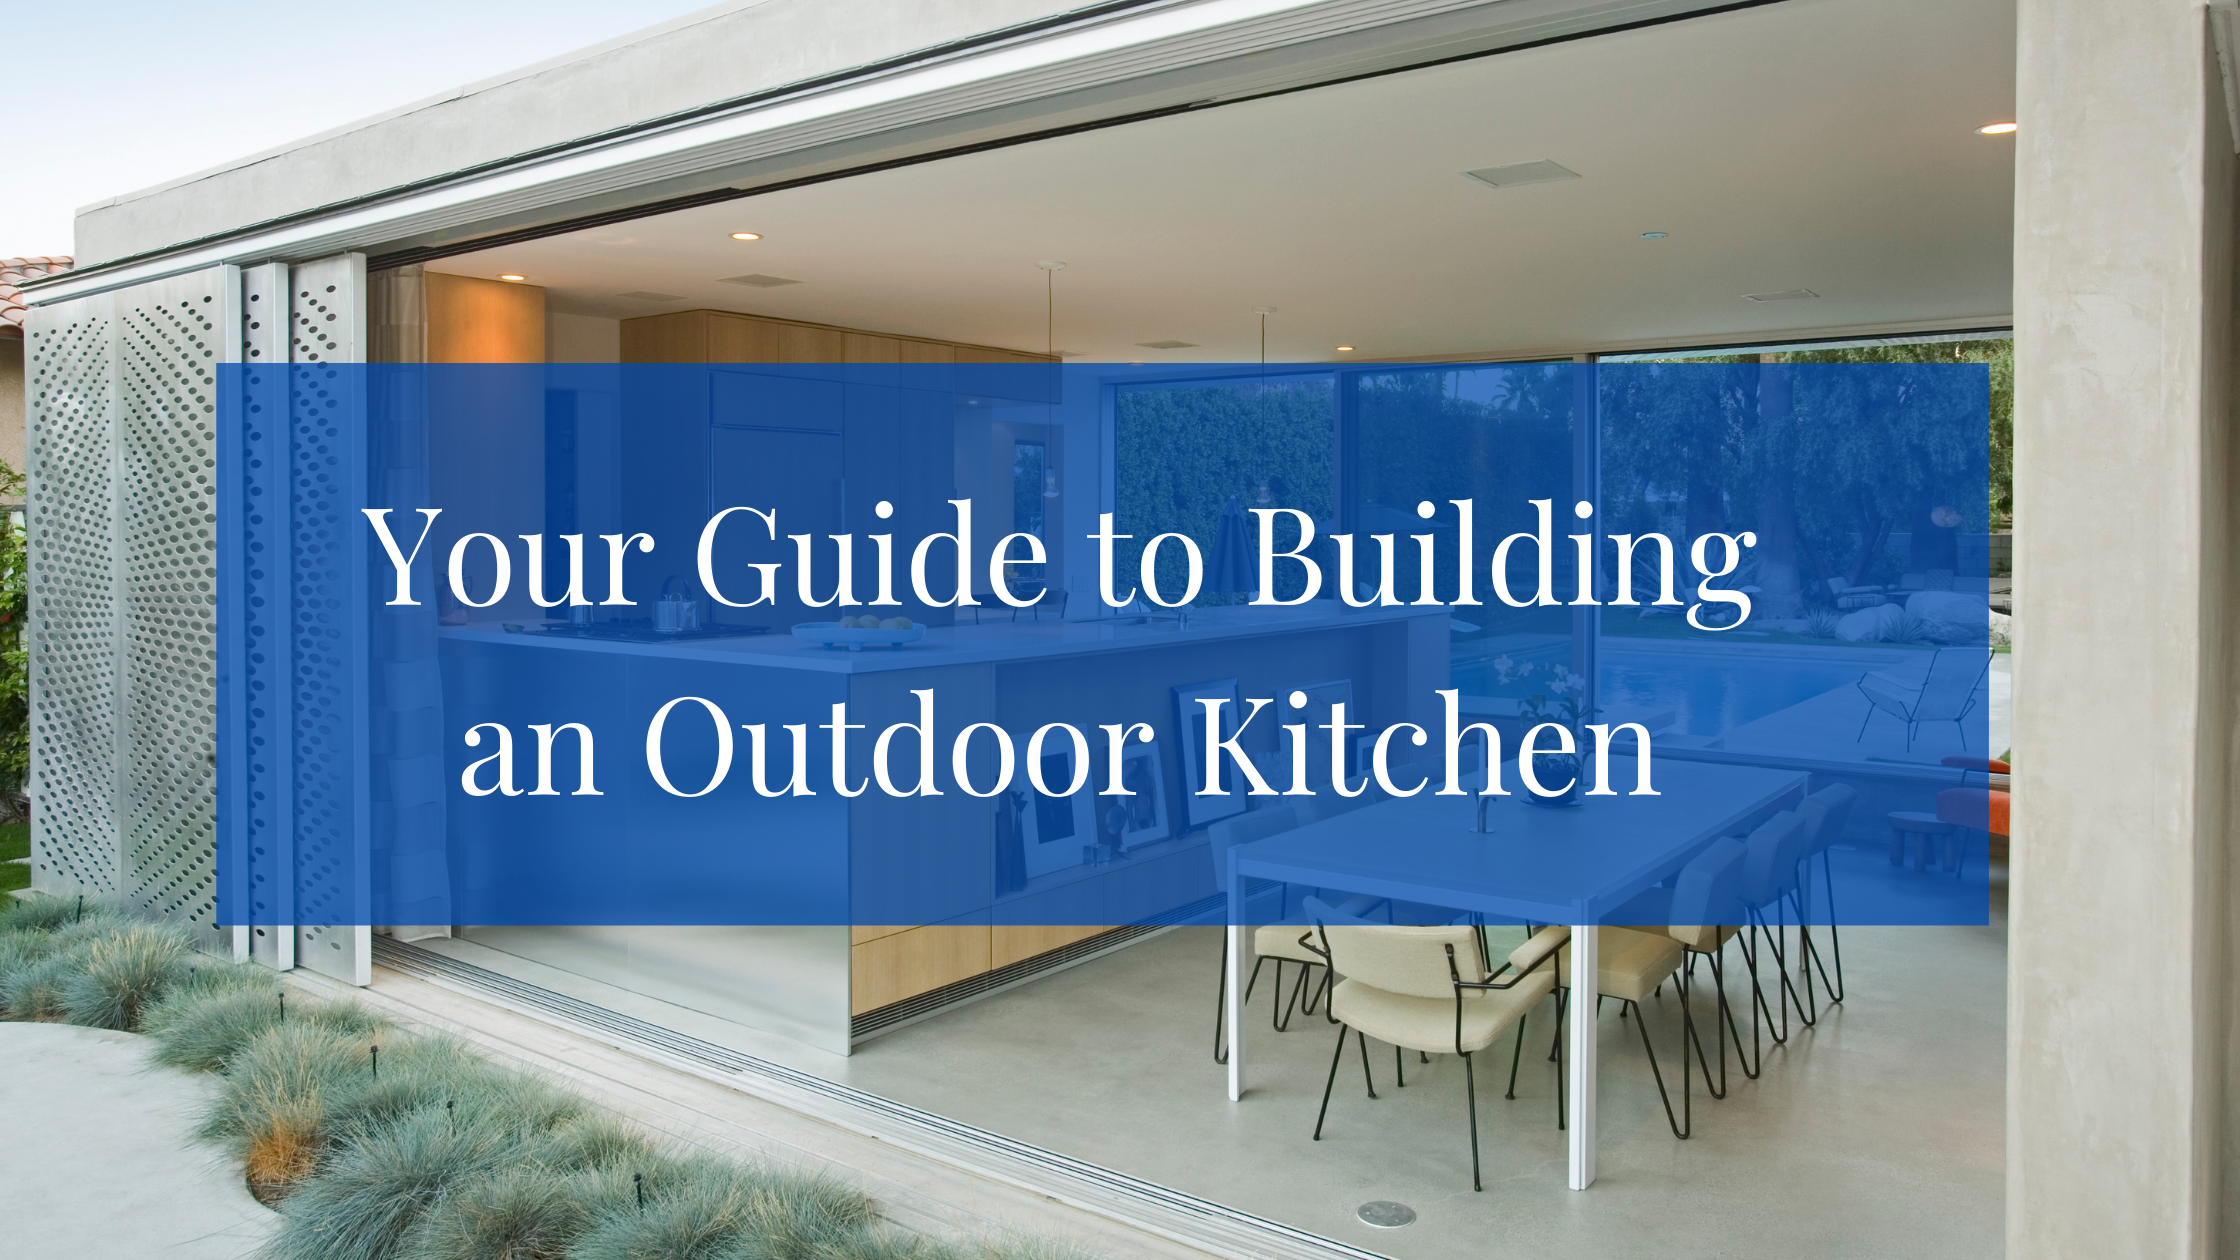 https://www.handymanconnection.net/wp-content/uploads/2021/05/Your-Guide-to-Building-an-Outdoor-Kitchen.png